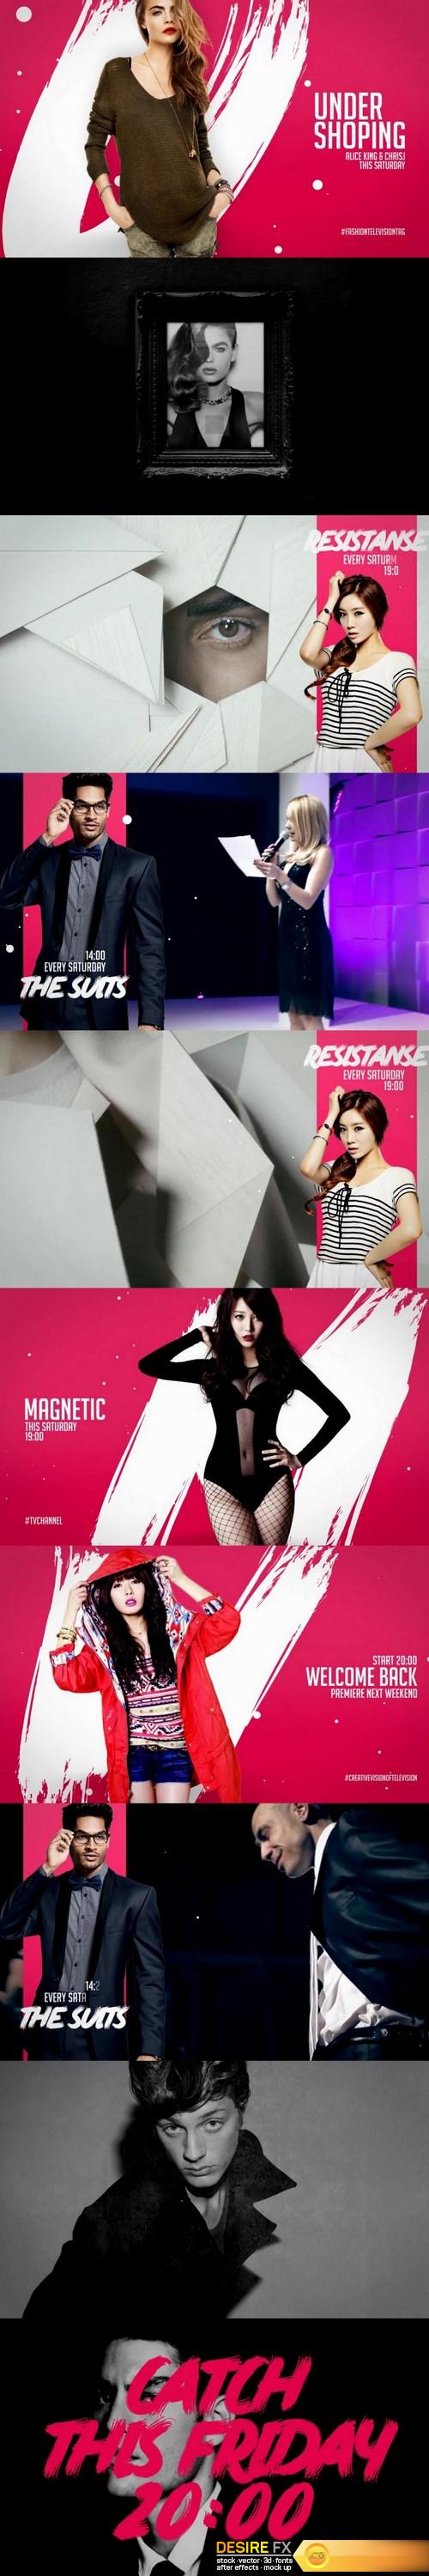 videohive-15769993-pink-fashion-broadcast